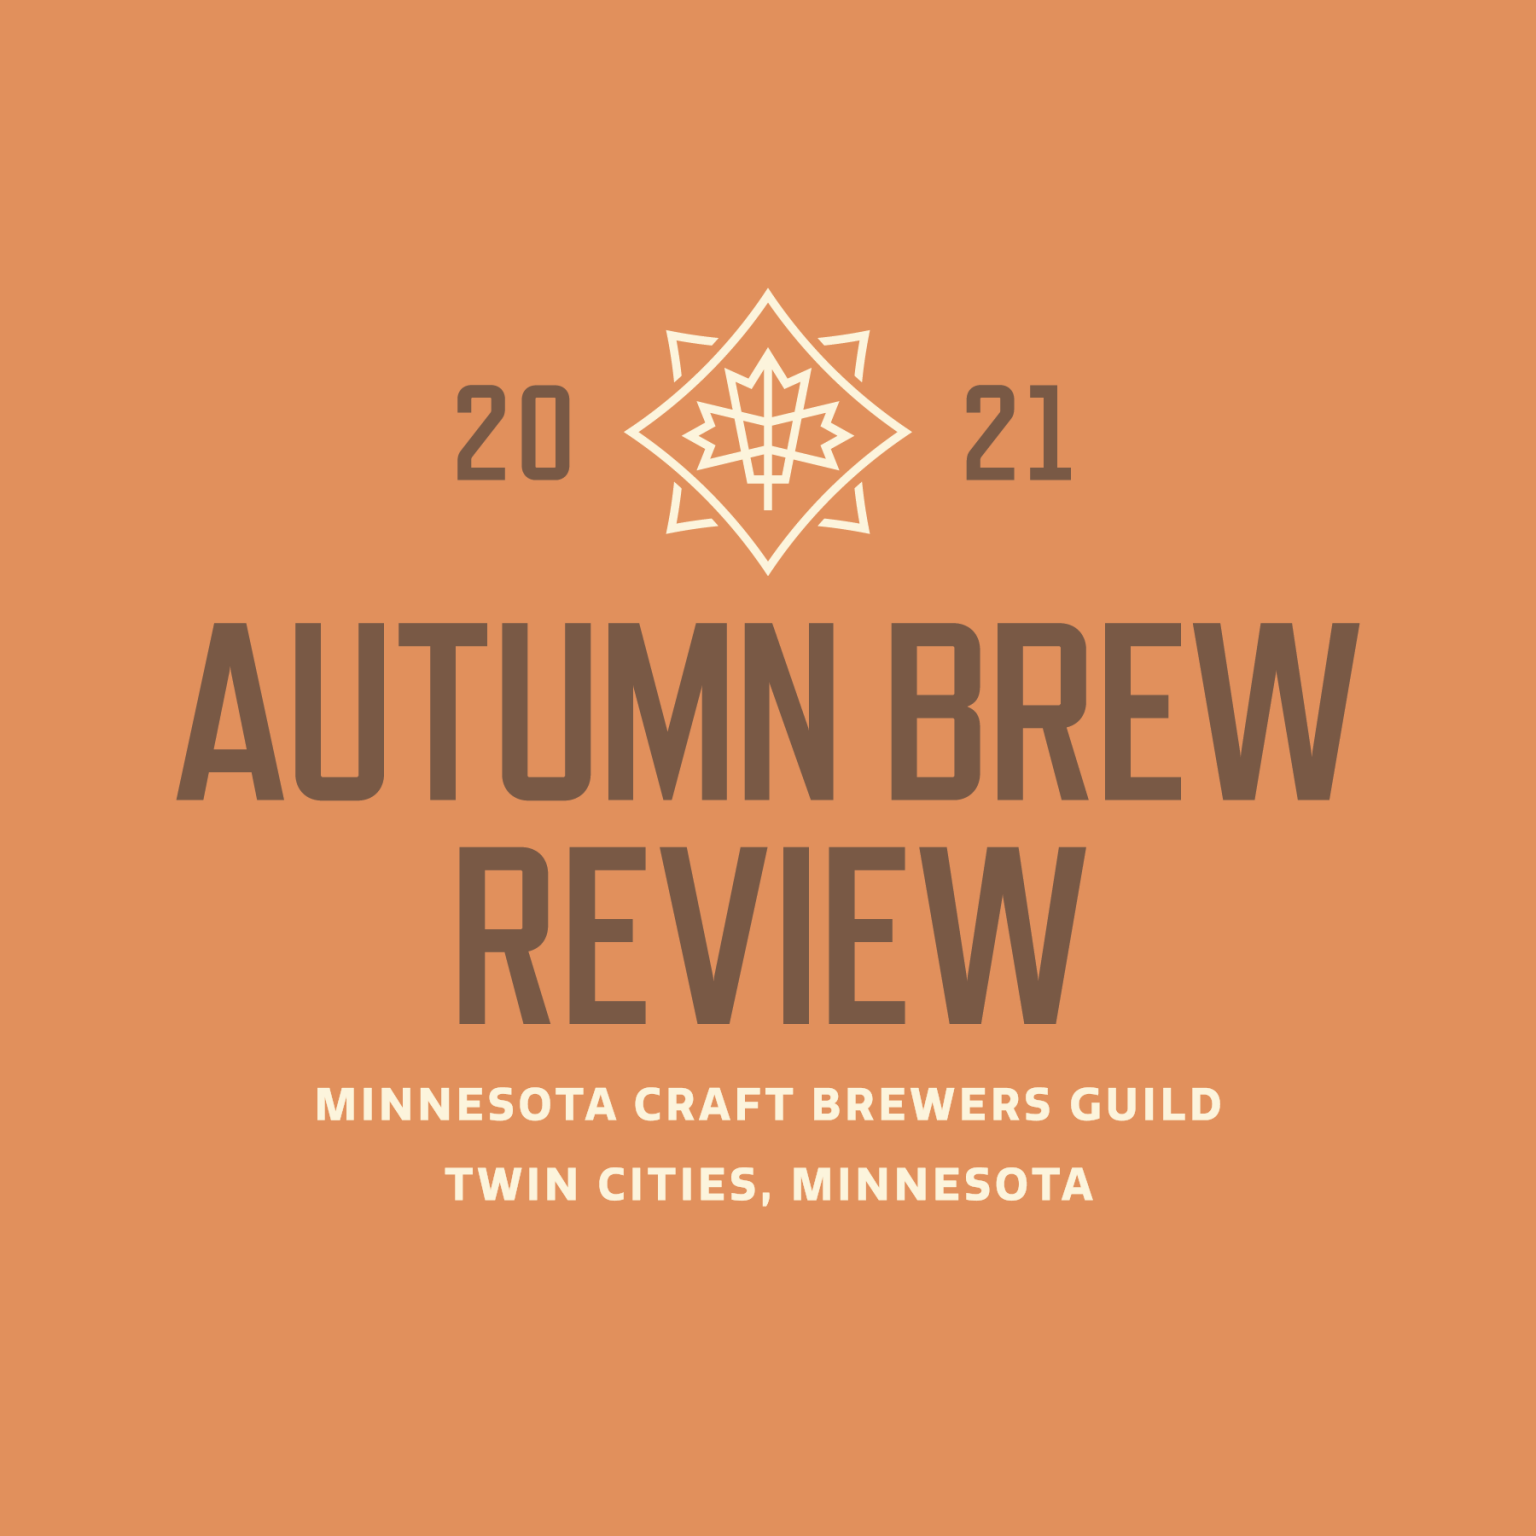 Events Minnesota Craft Brewers Guild